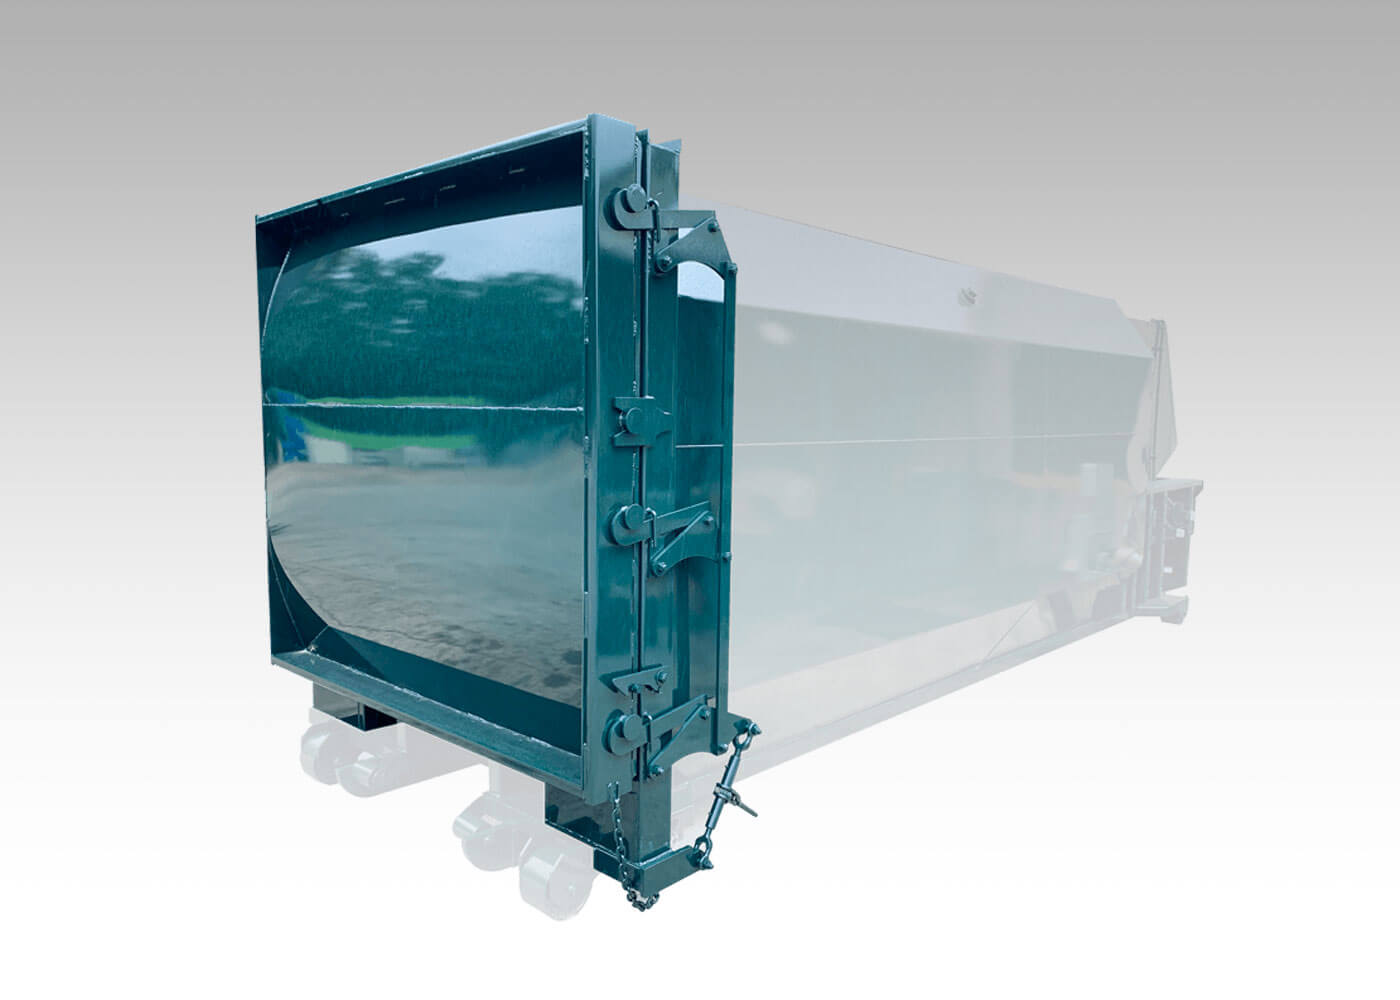 New Marathon SC2 commercial self contained trash compactor with the best quality rear gate